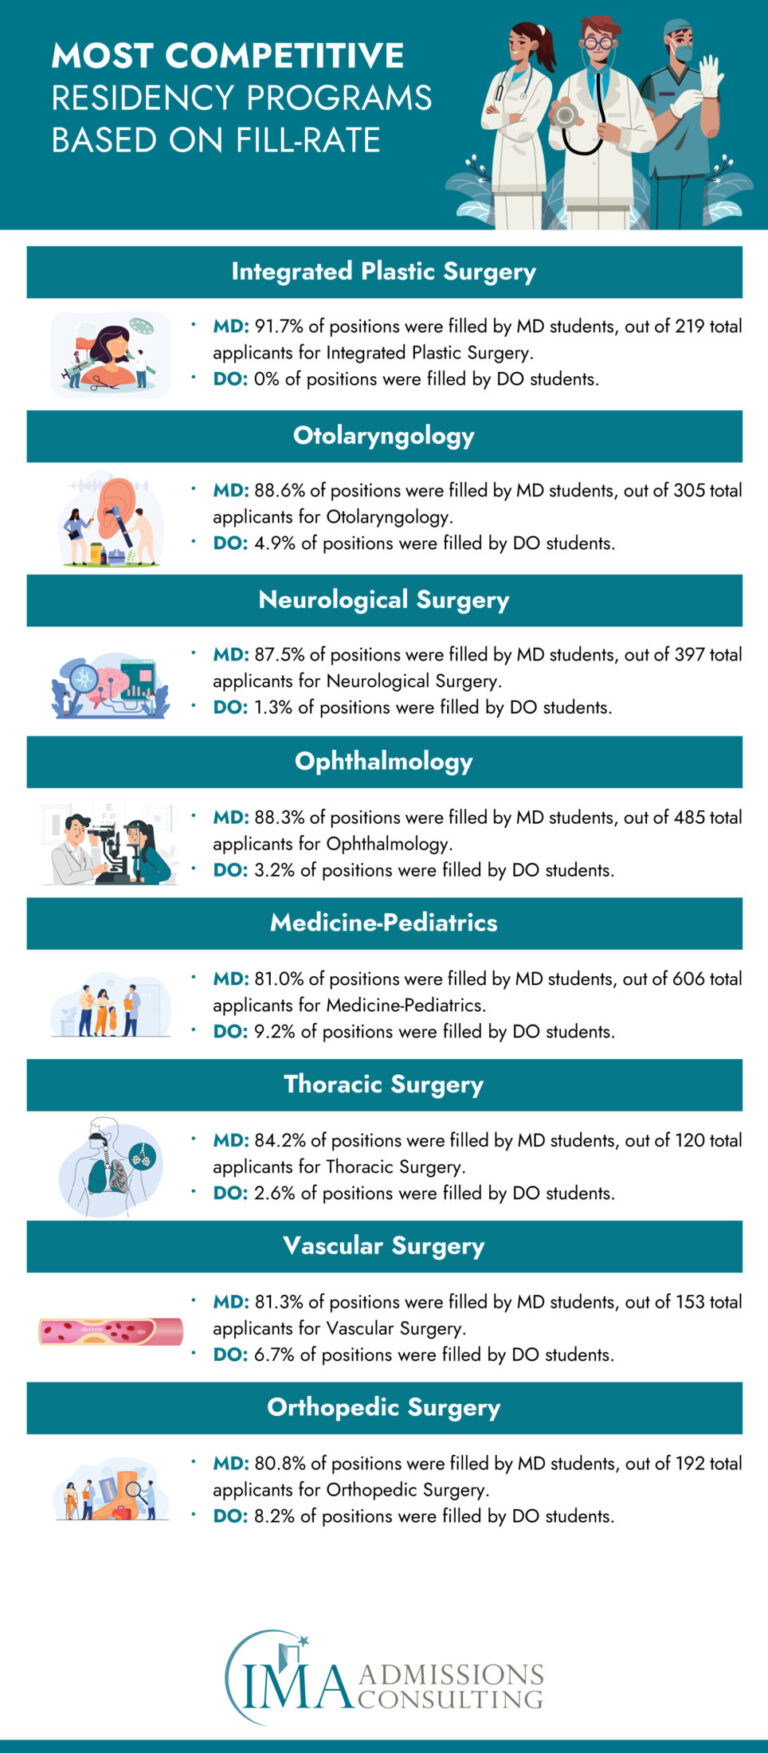 Most Competitive Residency Programs Based on Fill Rate